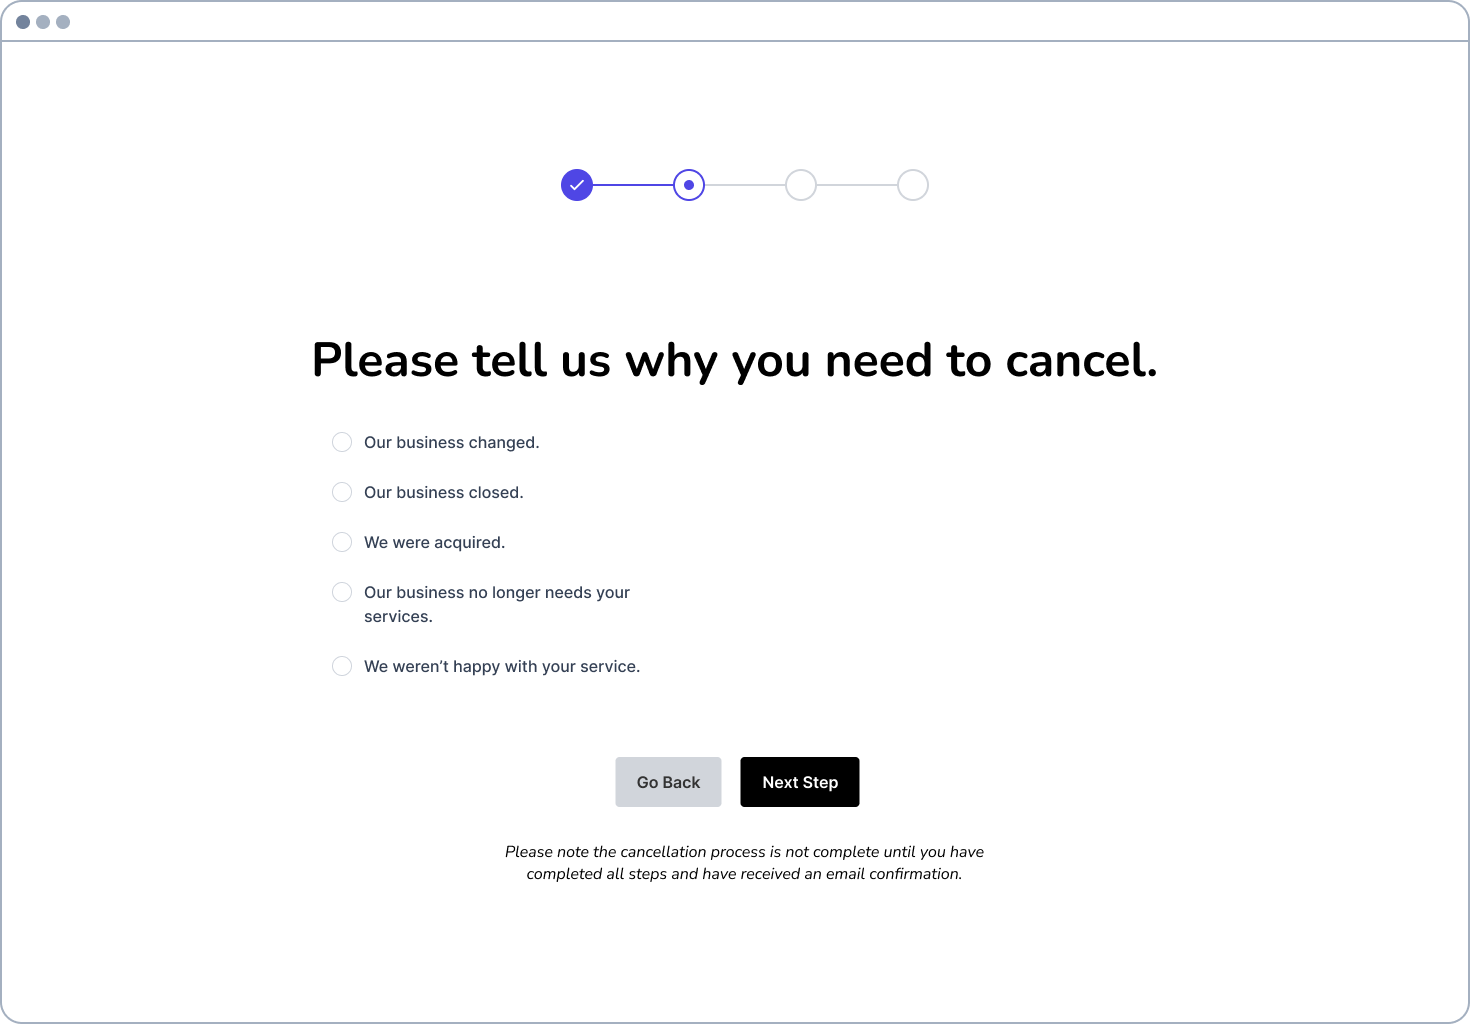 screenshot of sps cancellation process - step 2 asks why they need to cancel